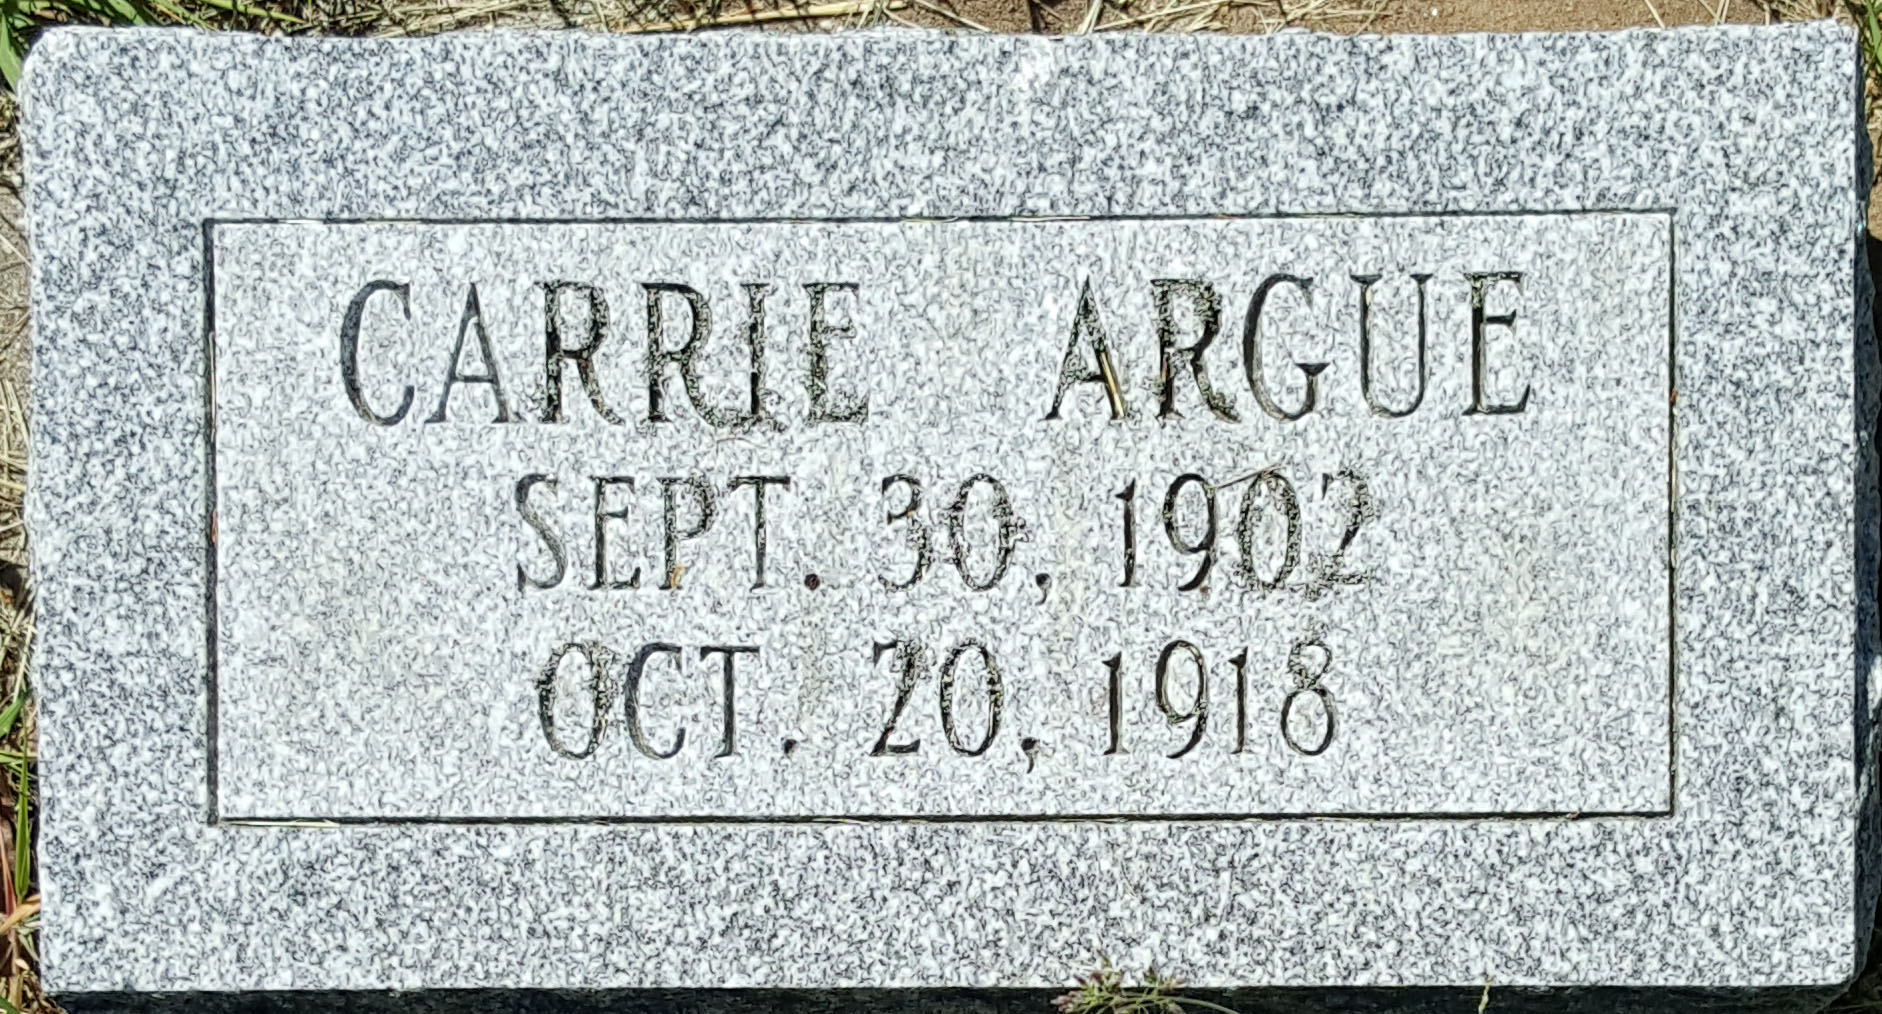 Carrie Argue's Marker